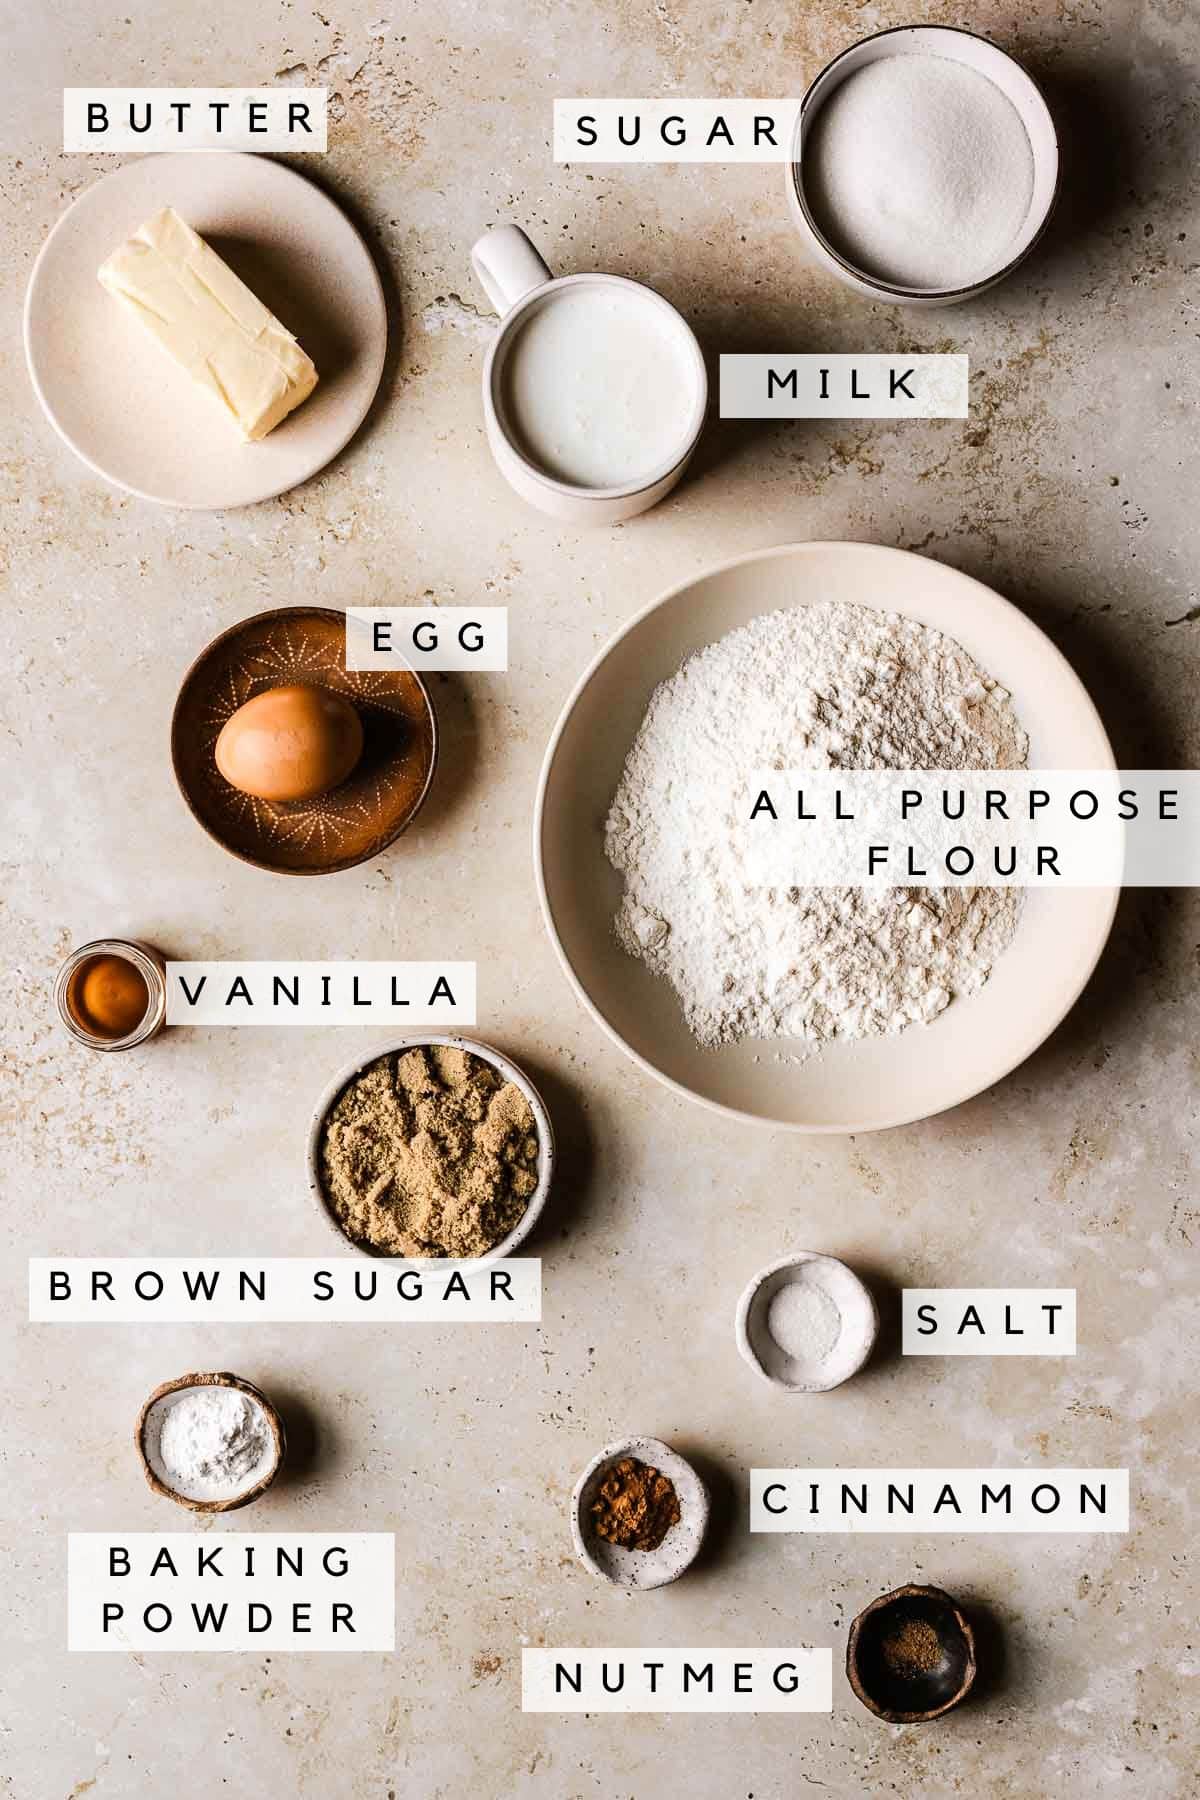 Small bowls with ingredients for cinnamon streusel muffins on a tan stone background. There are labels identifying each ingredient.